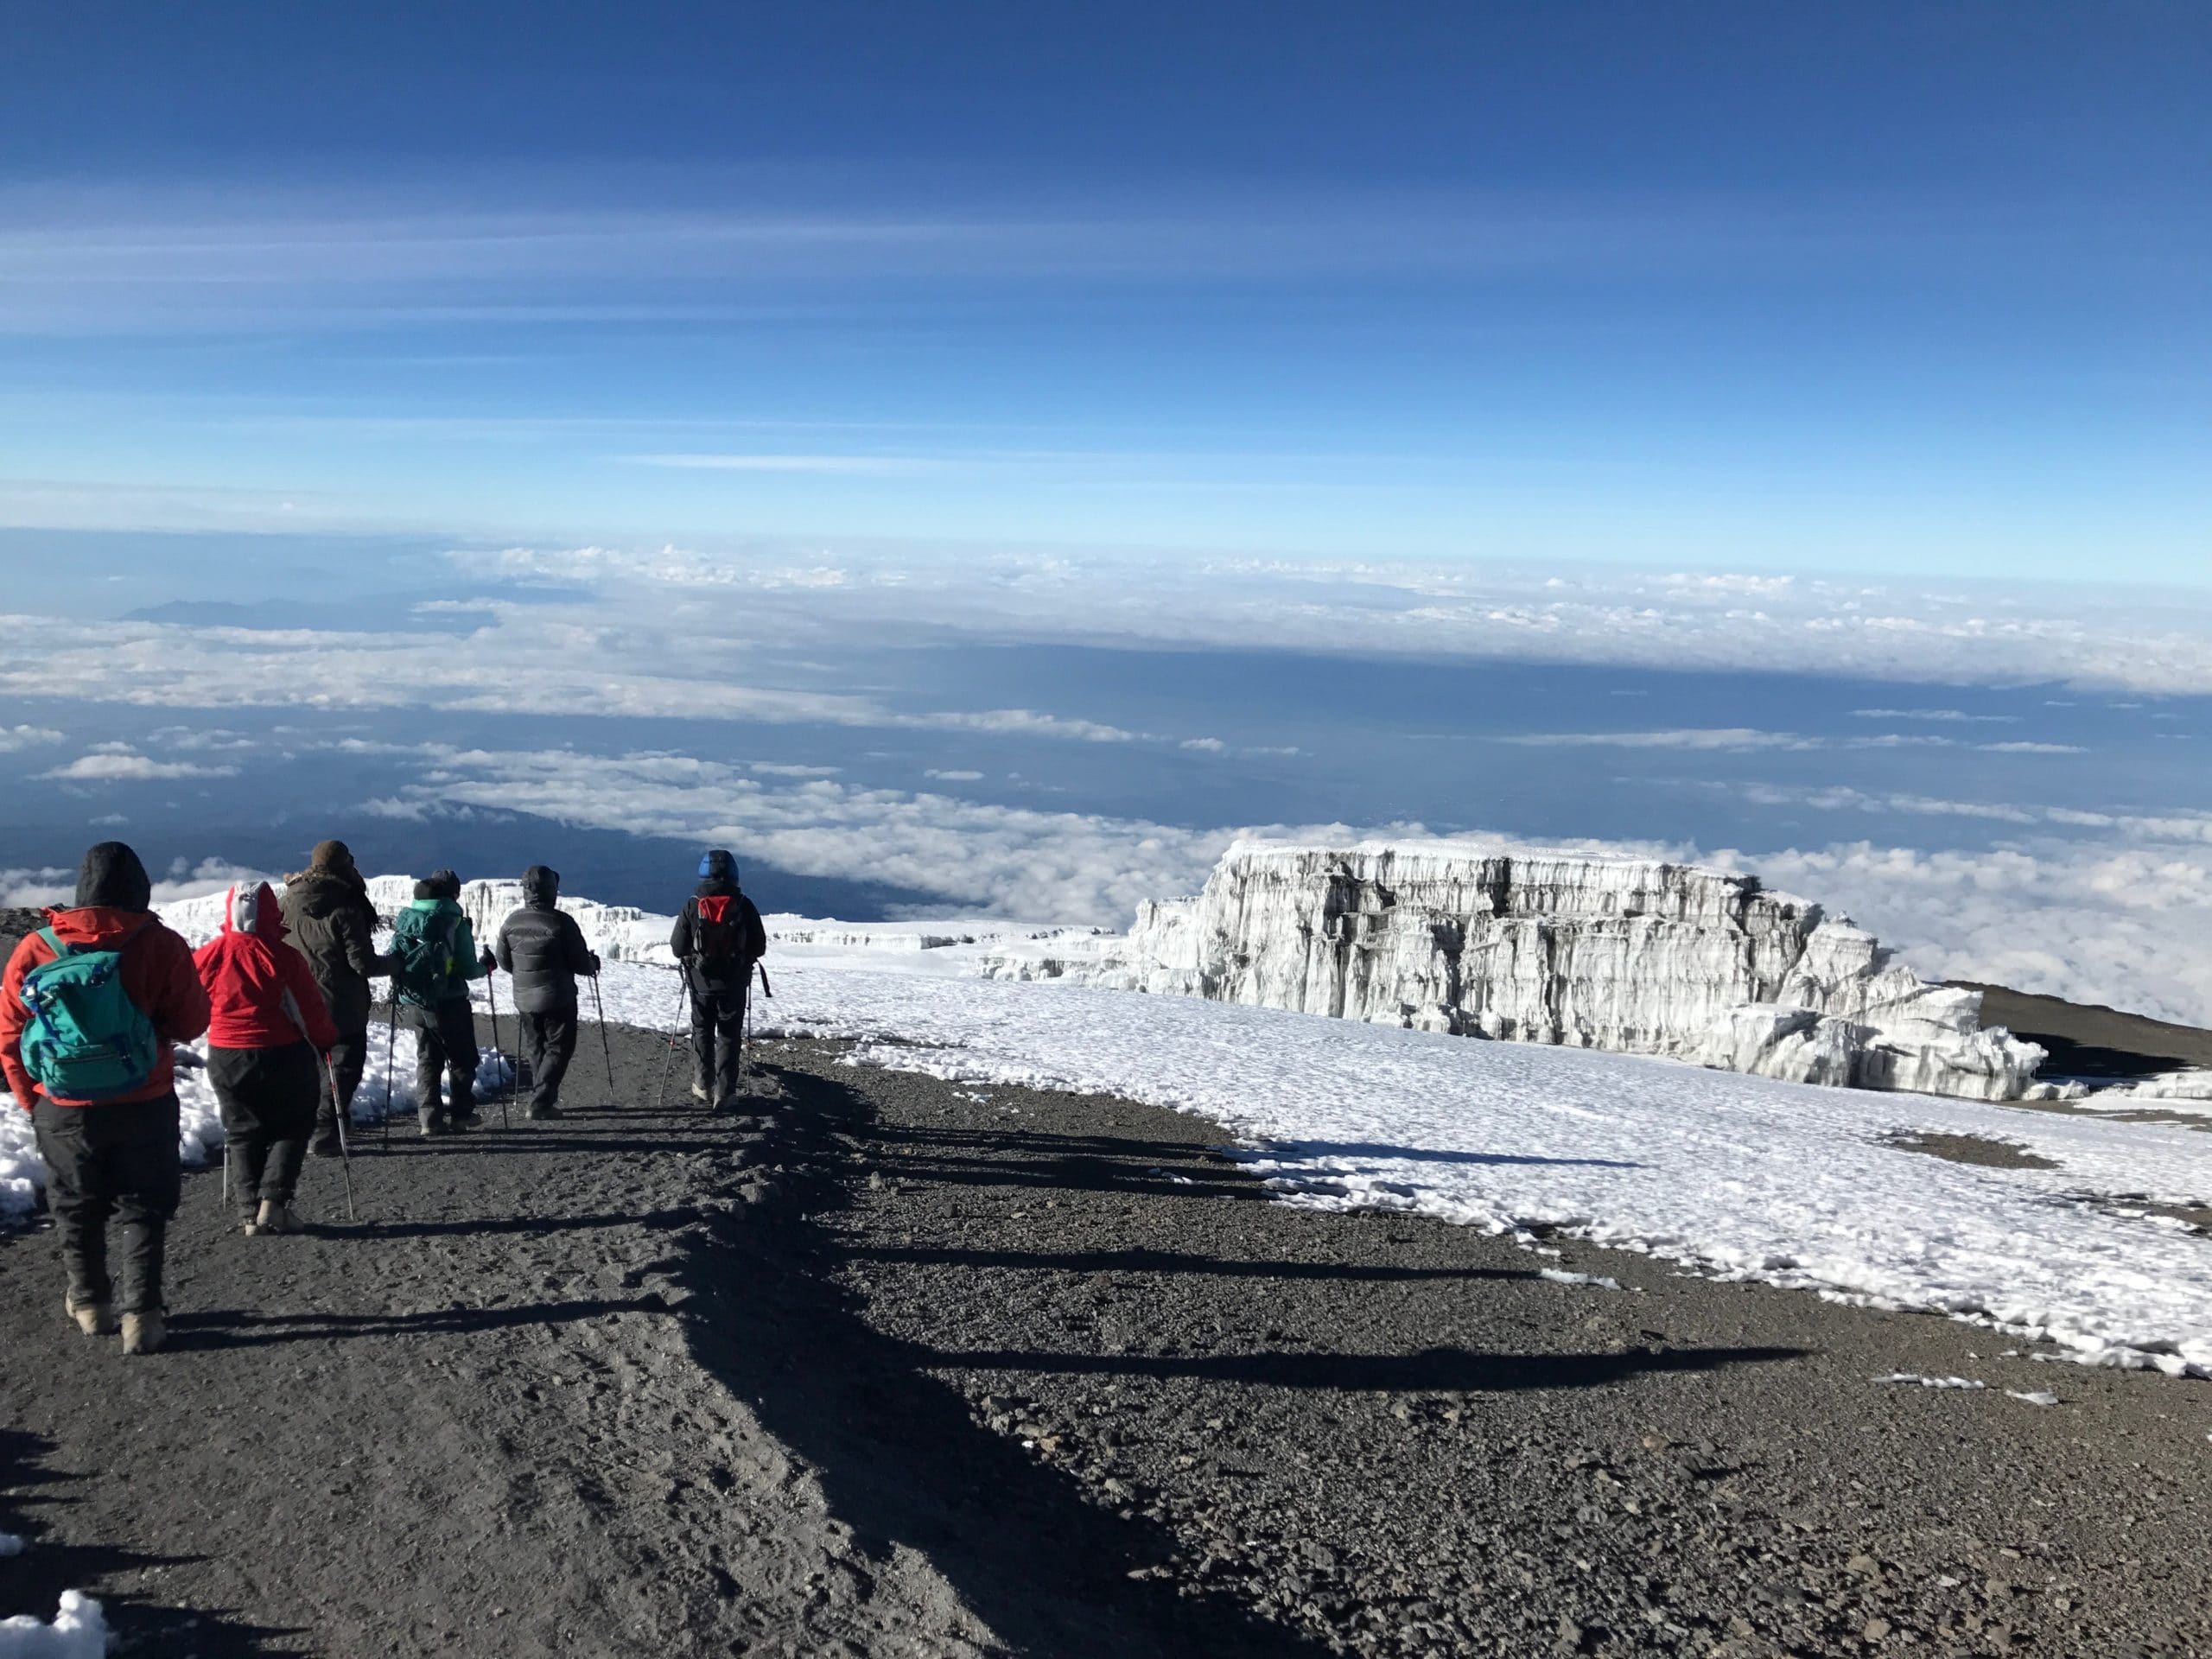 Mount Kilimanjaro an experience of a lifetime!